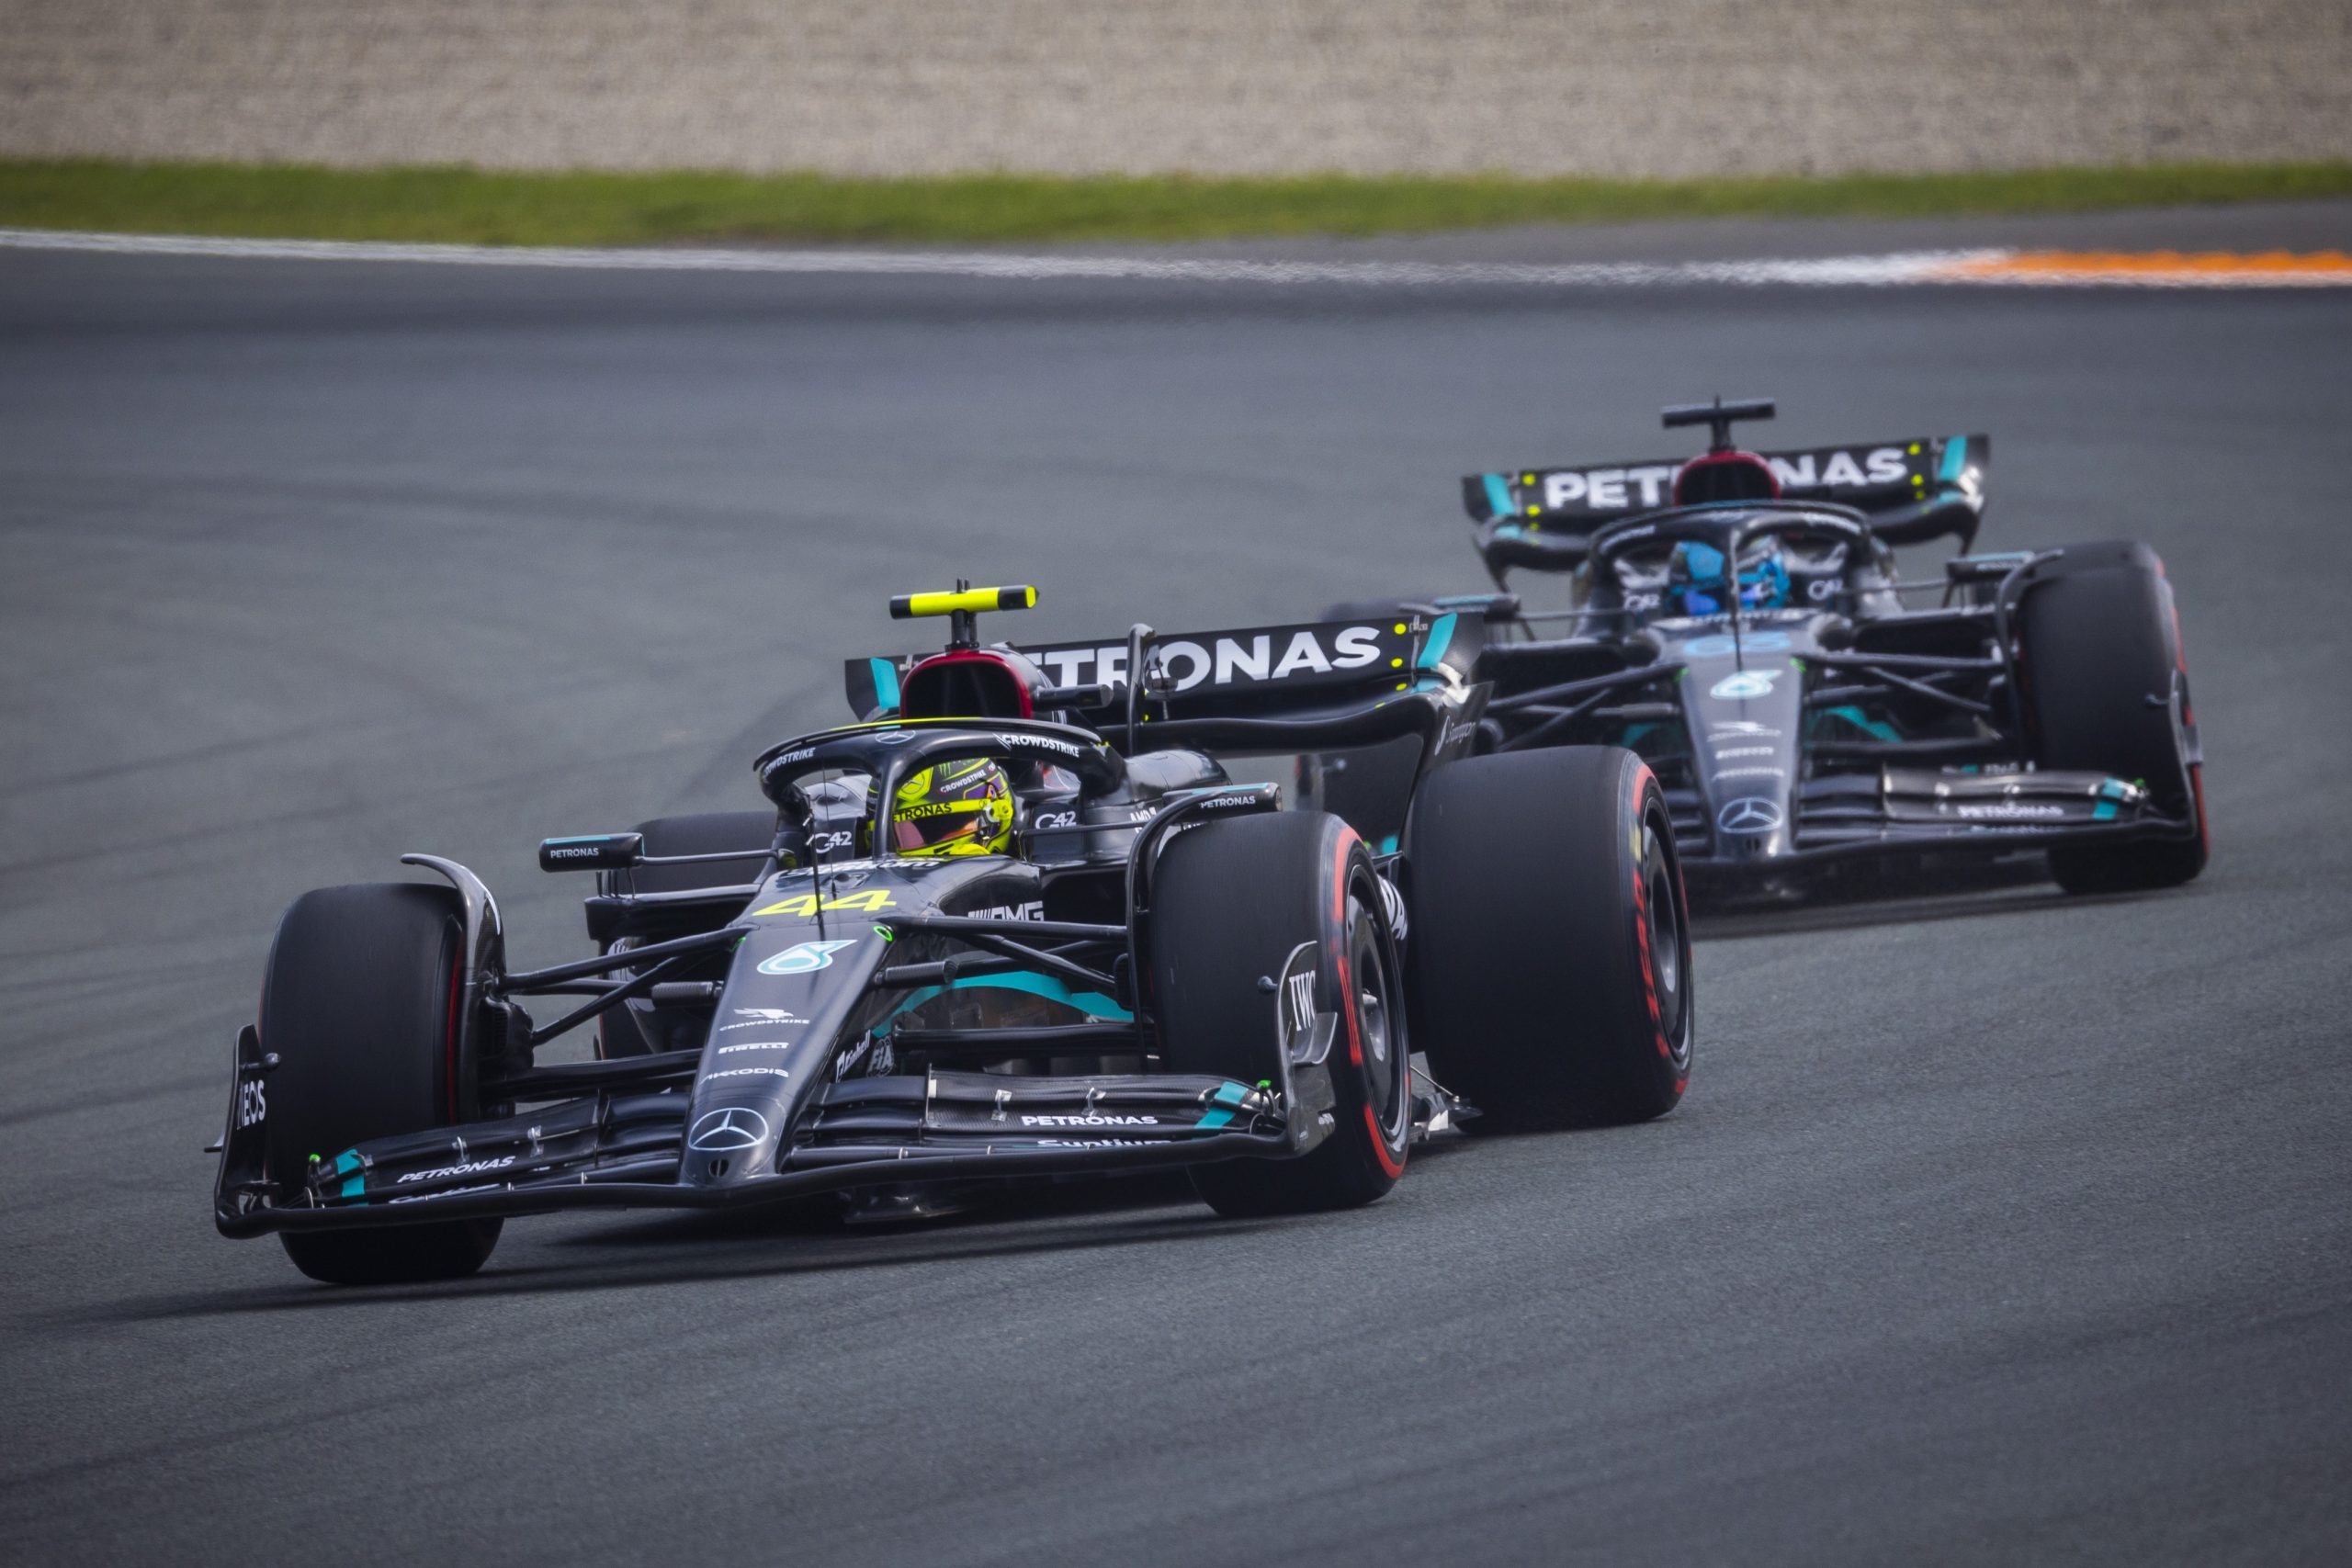 Lewis Hamilton (44) leads his Mercedes teammate George Russell (63) around the Circuit Zandvoort ahead of the Formula 1 Dutch Grand Prix